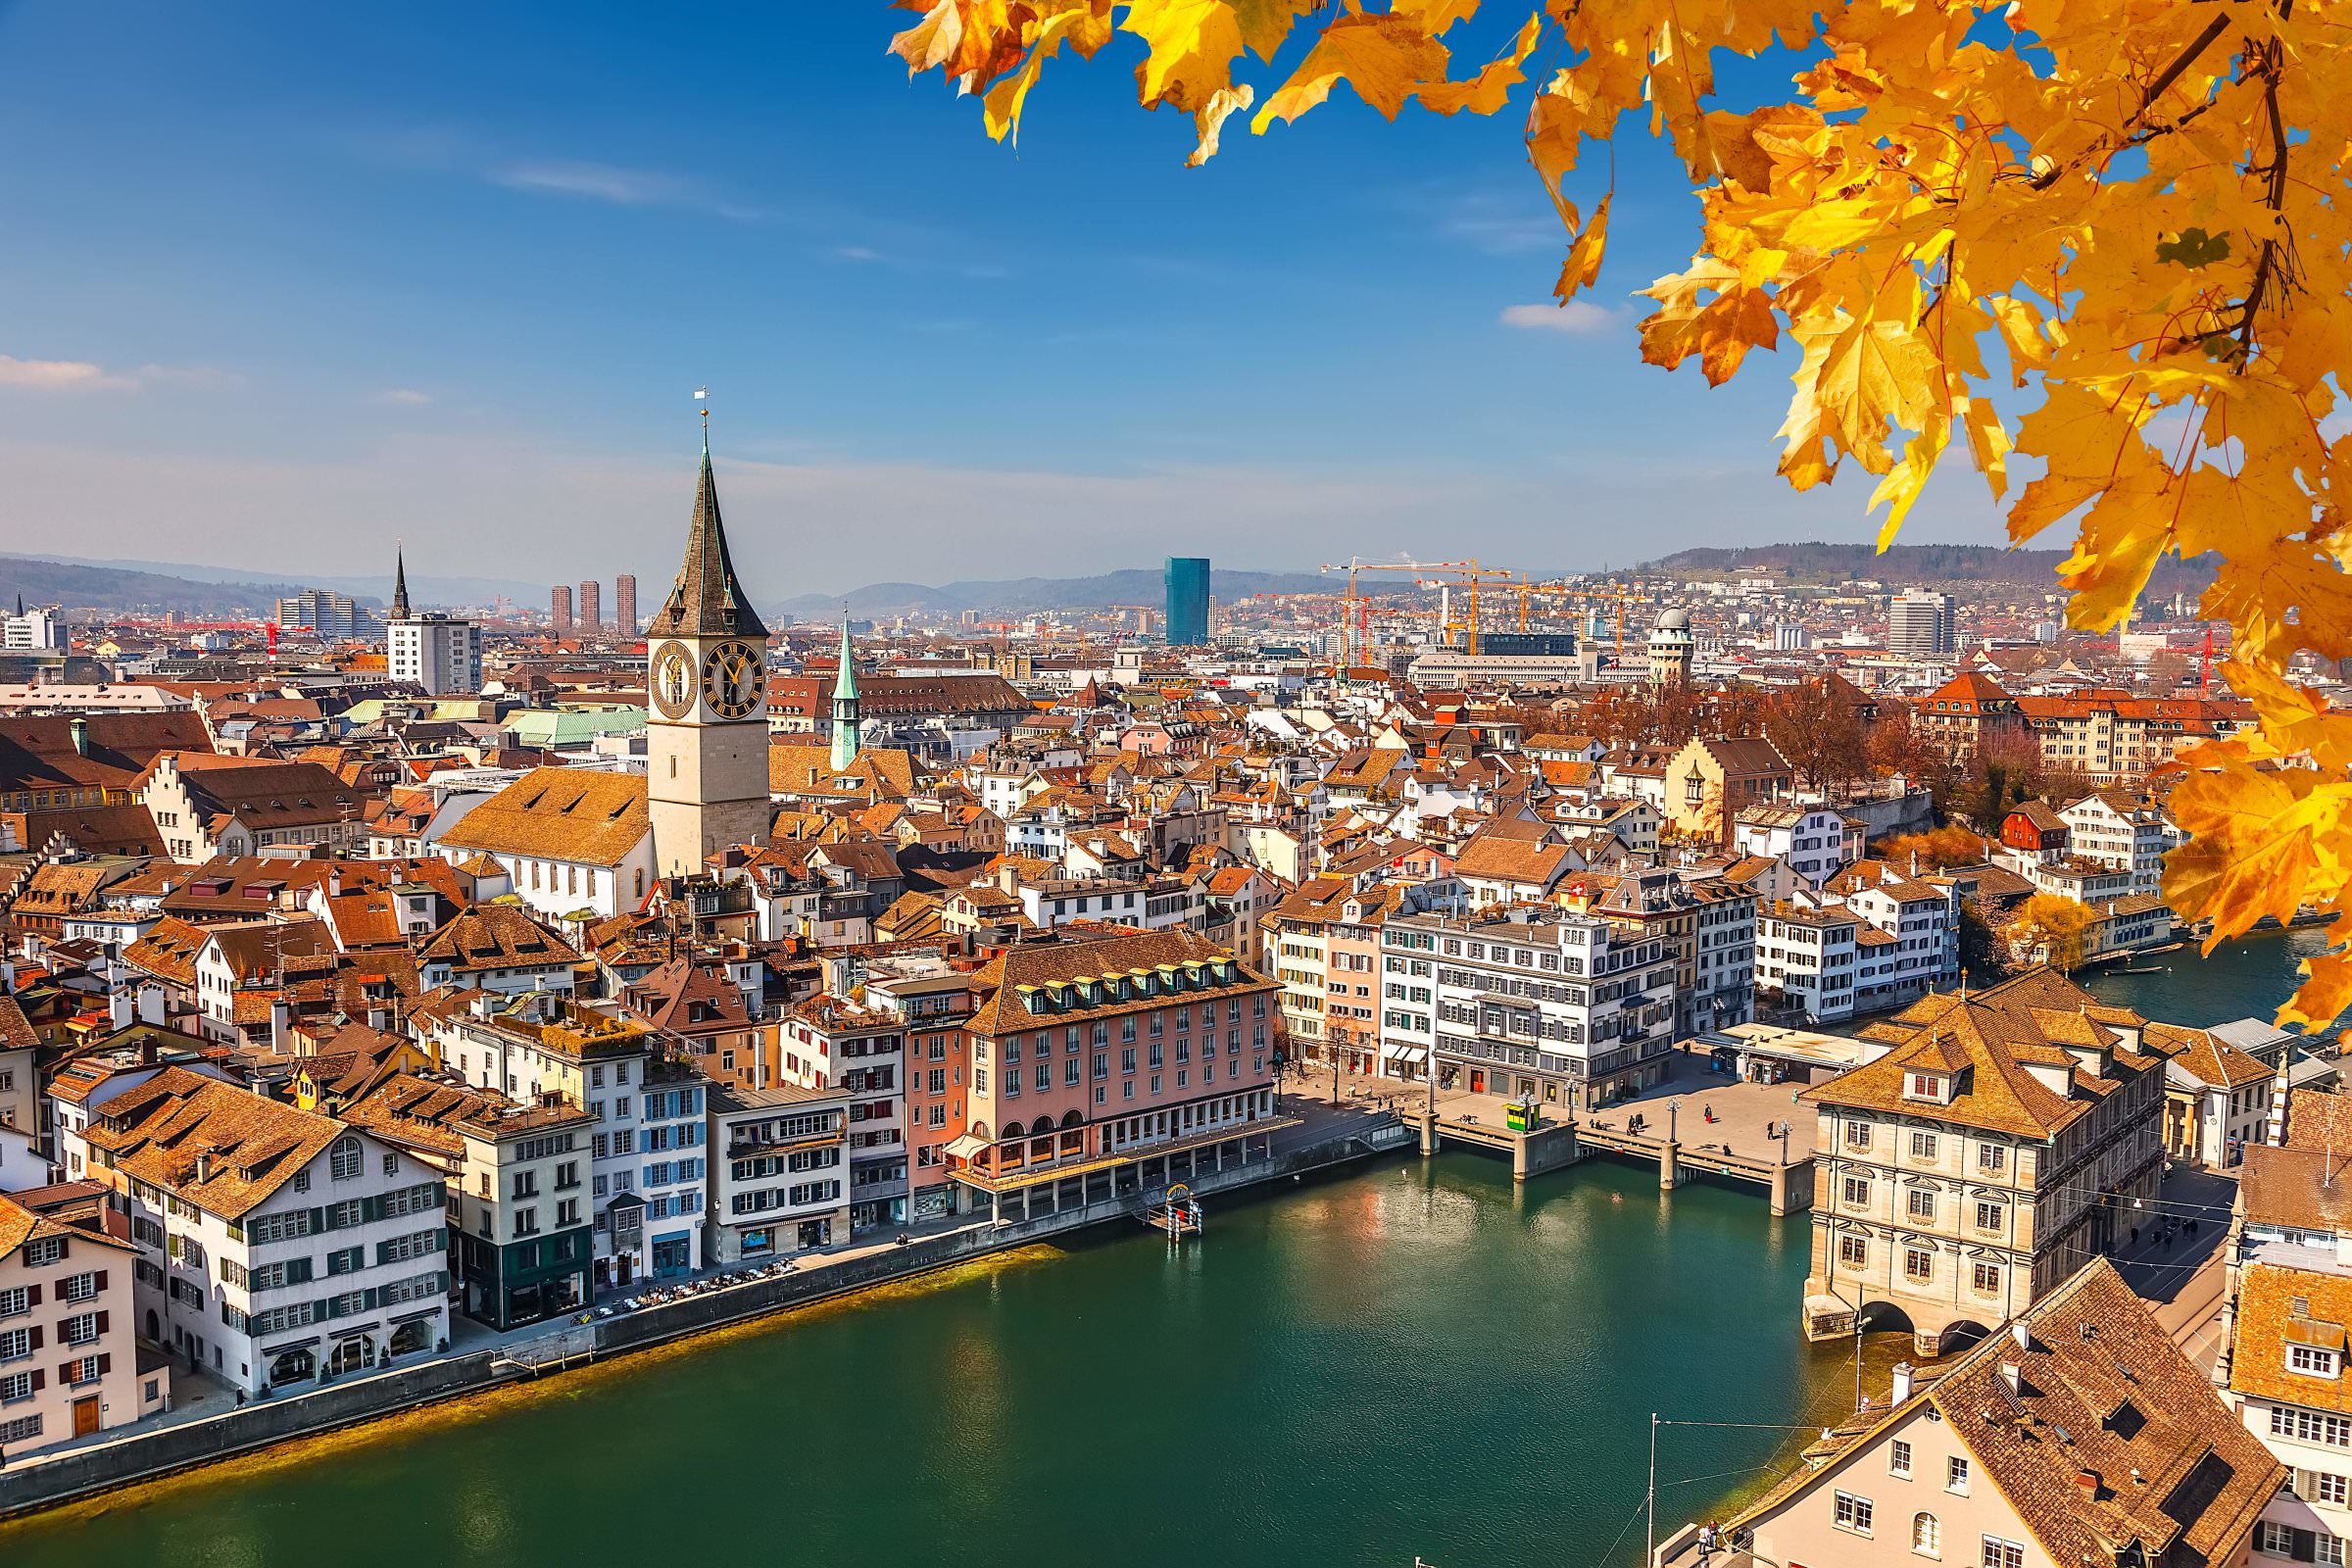 Perfect 7 day Switzerland Family Vacation Packages